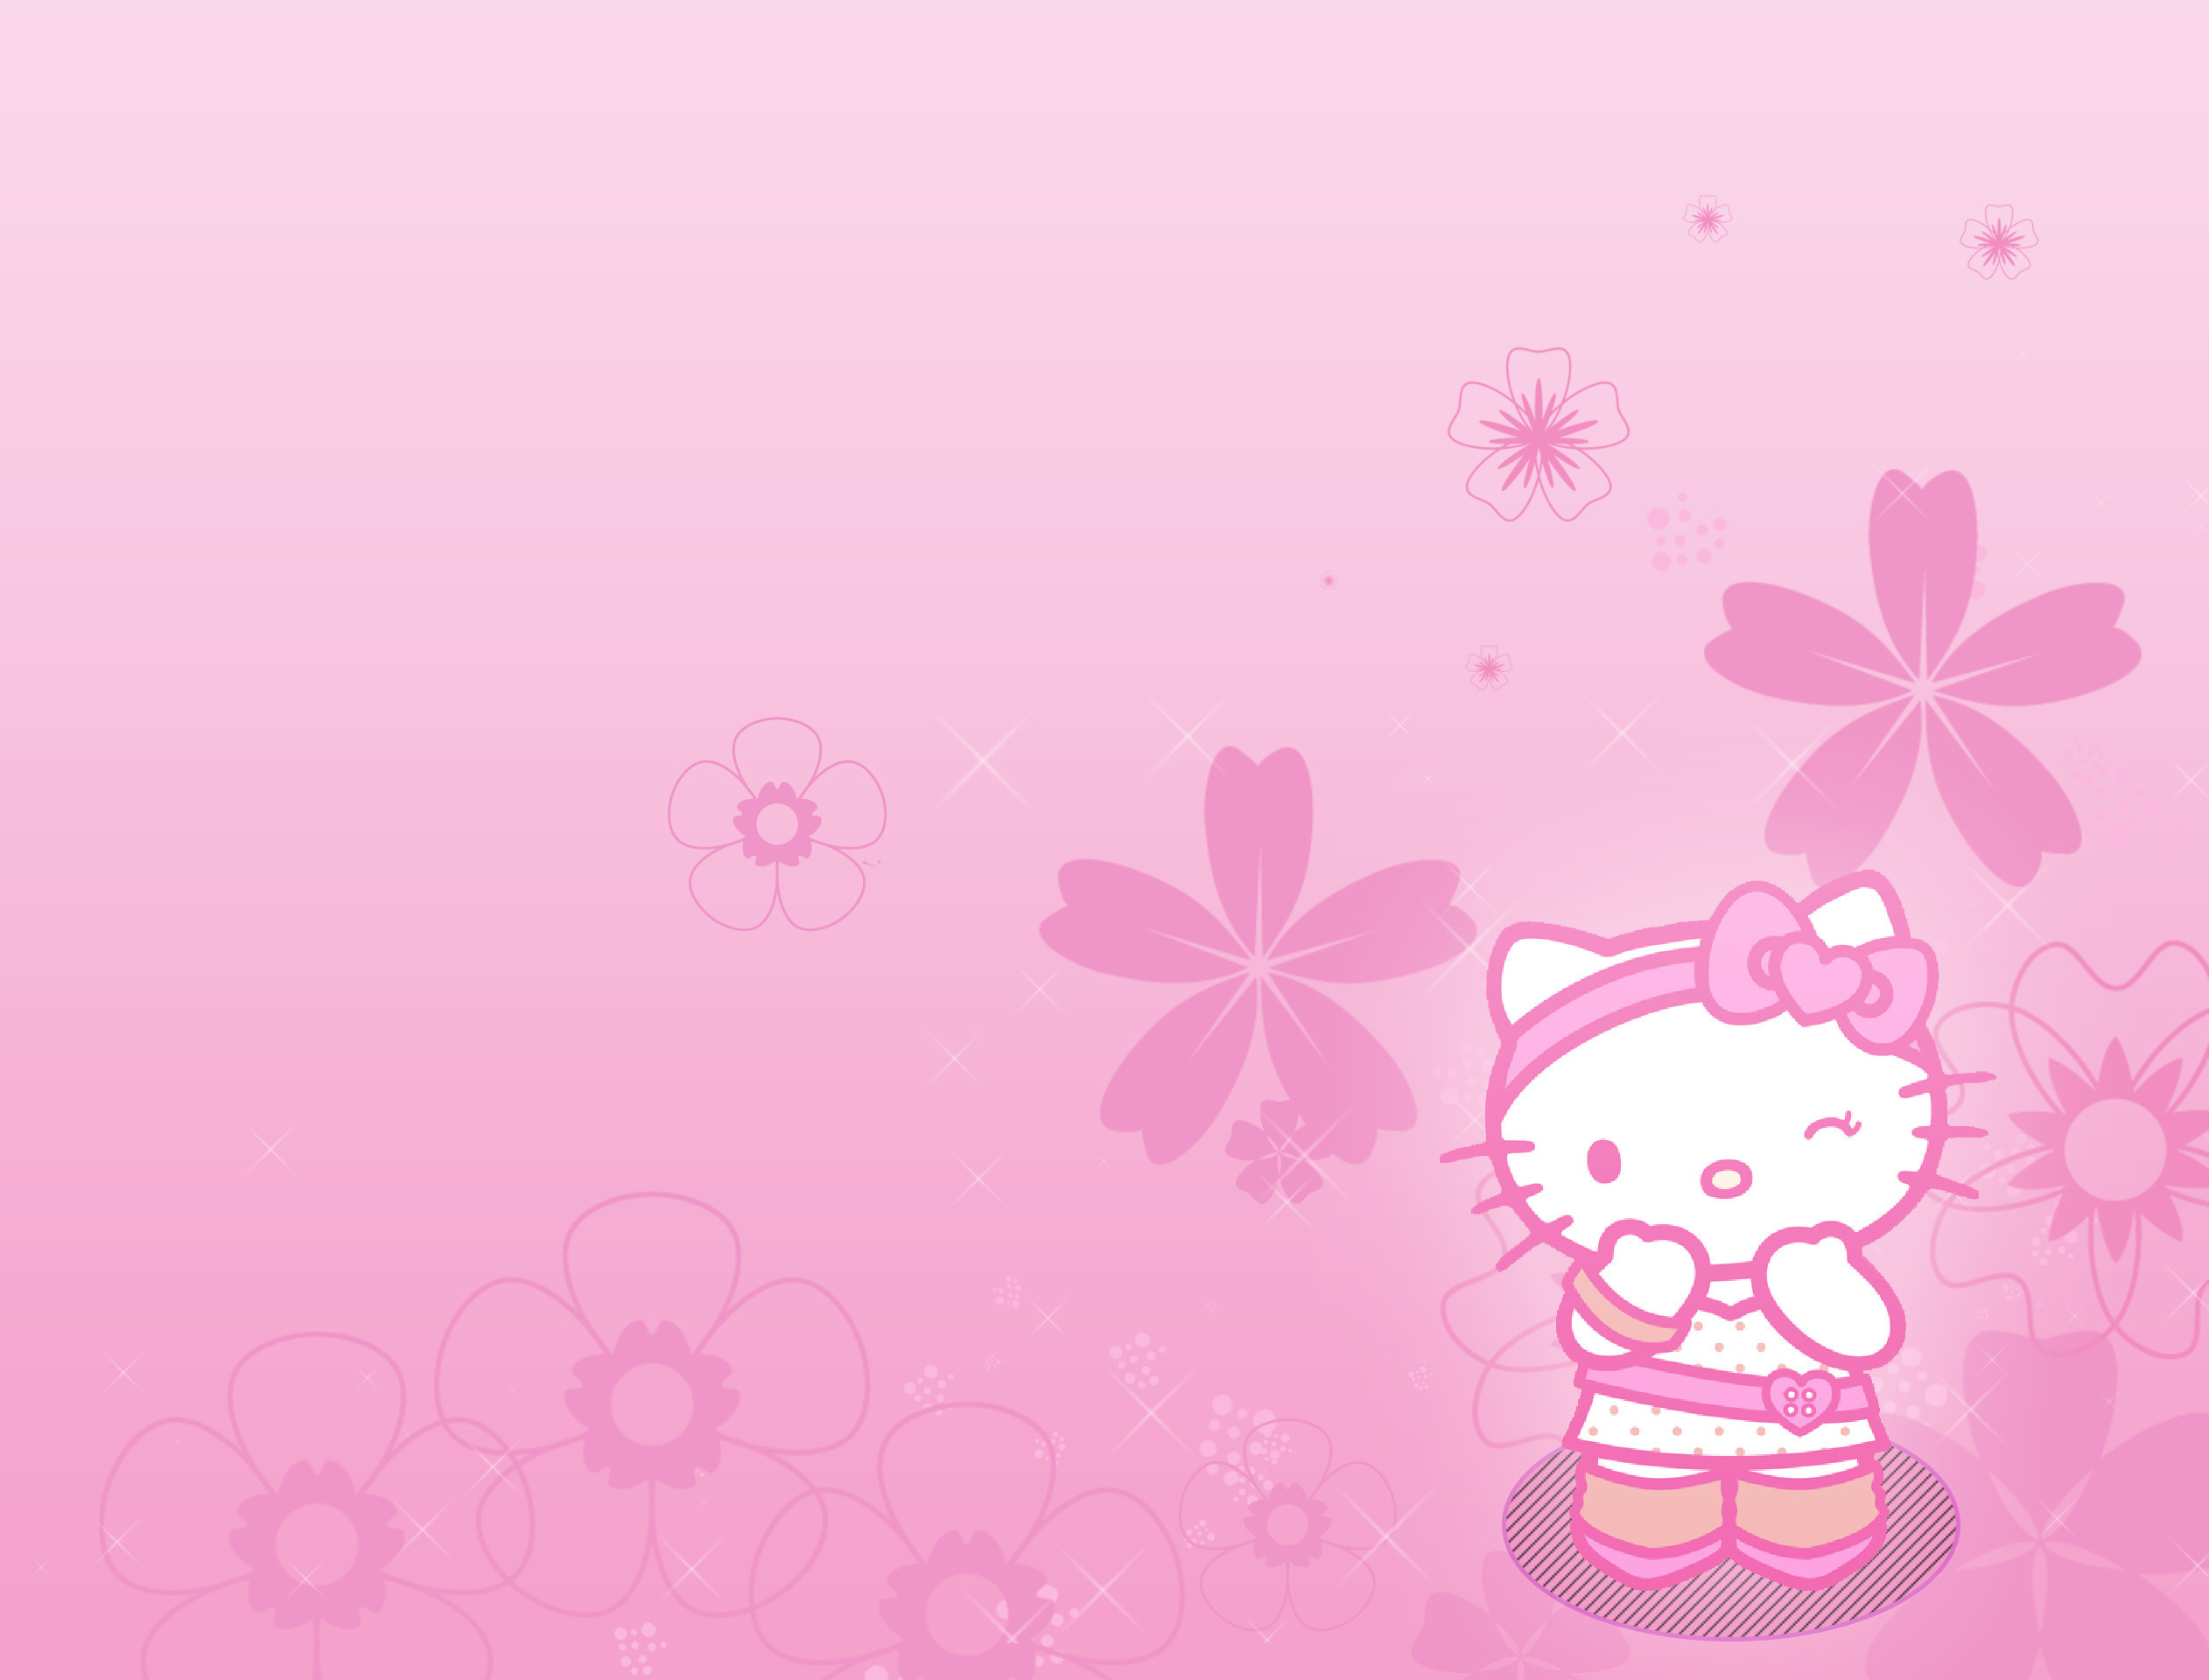 Iphone Backgrounds, Wallpaper Backgrounds, Iphone Wallpapers, - Hello Kitty  Hd Background - 2524x1920 Wallpaper 